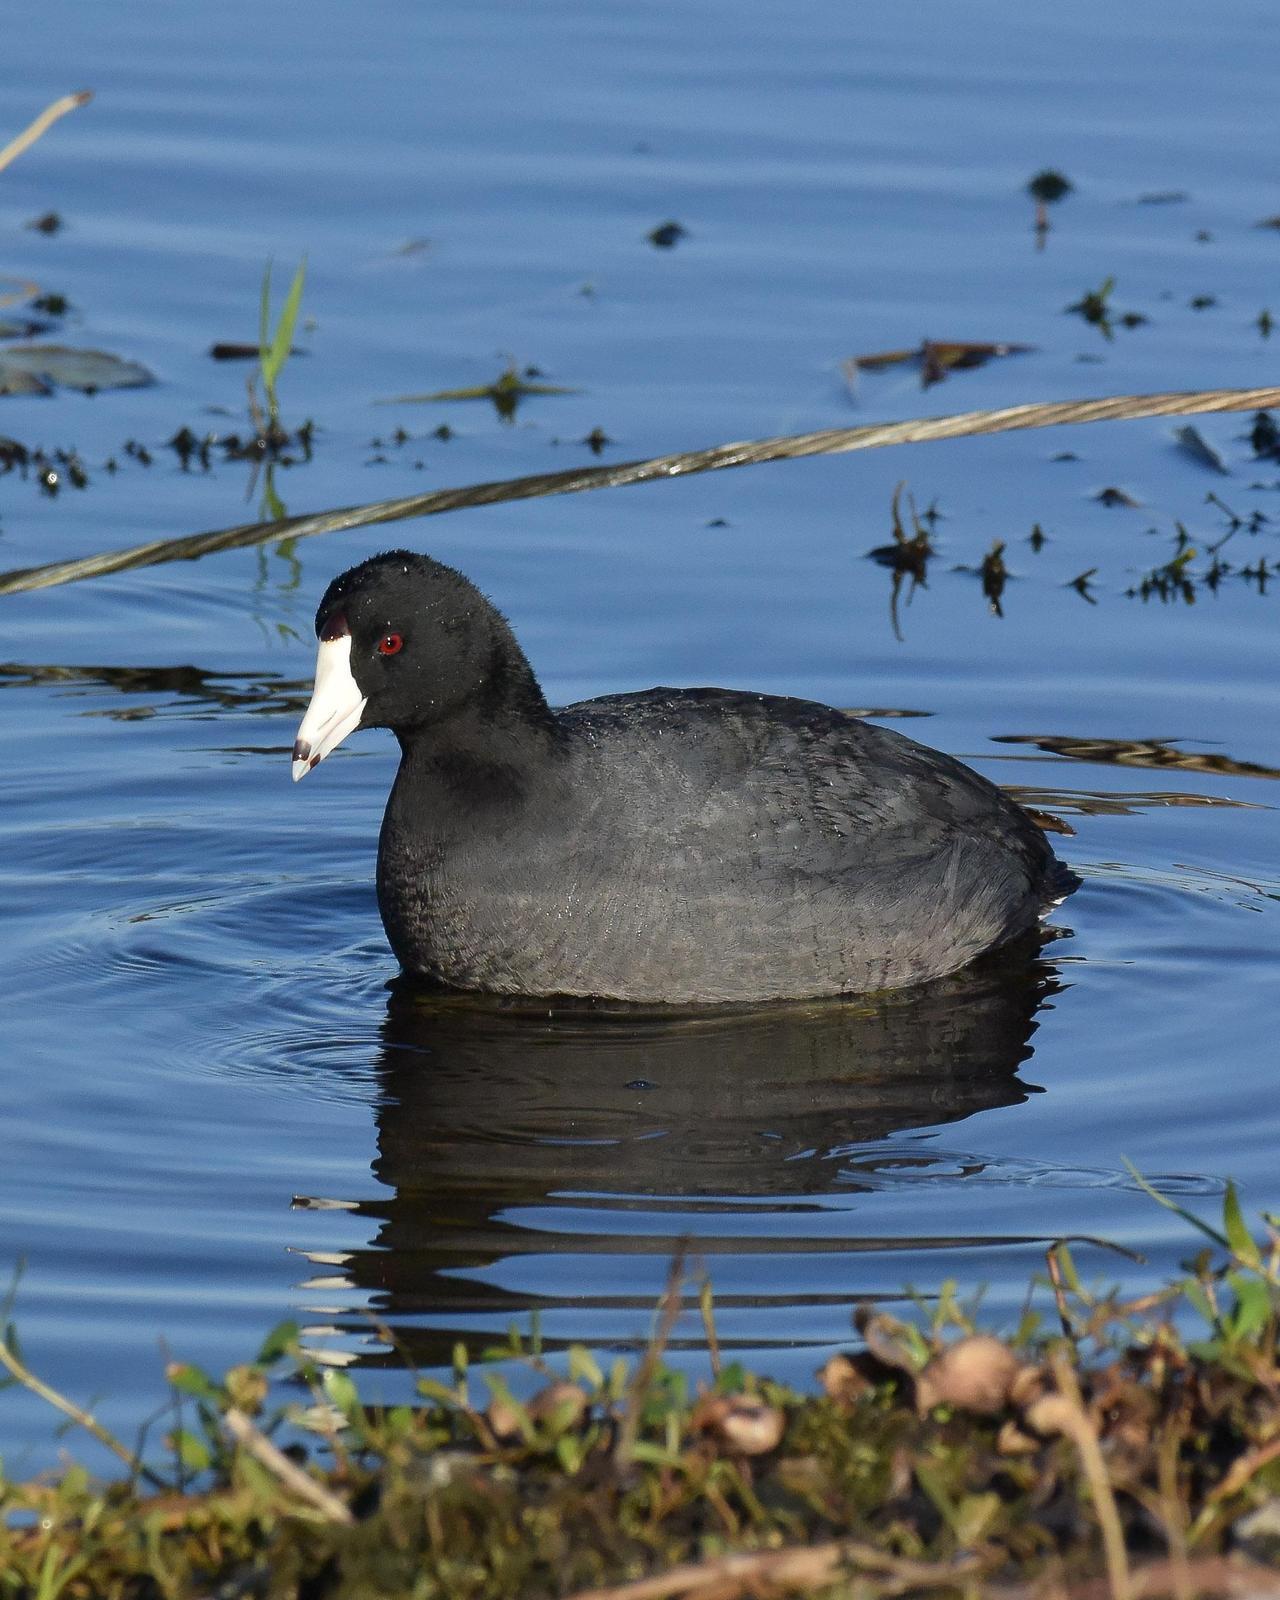 American Coot Photo by Emily Percival